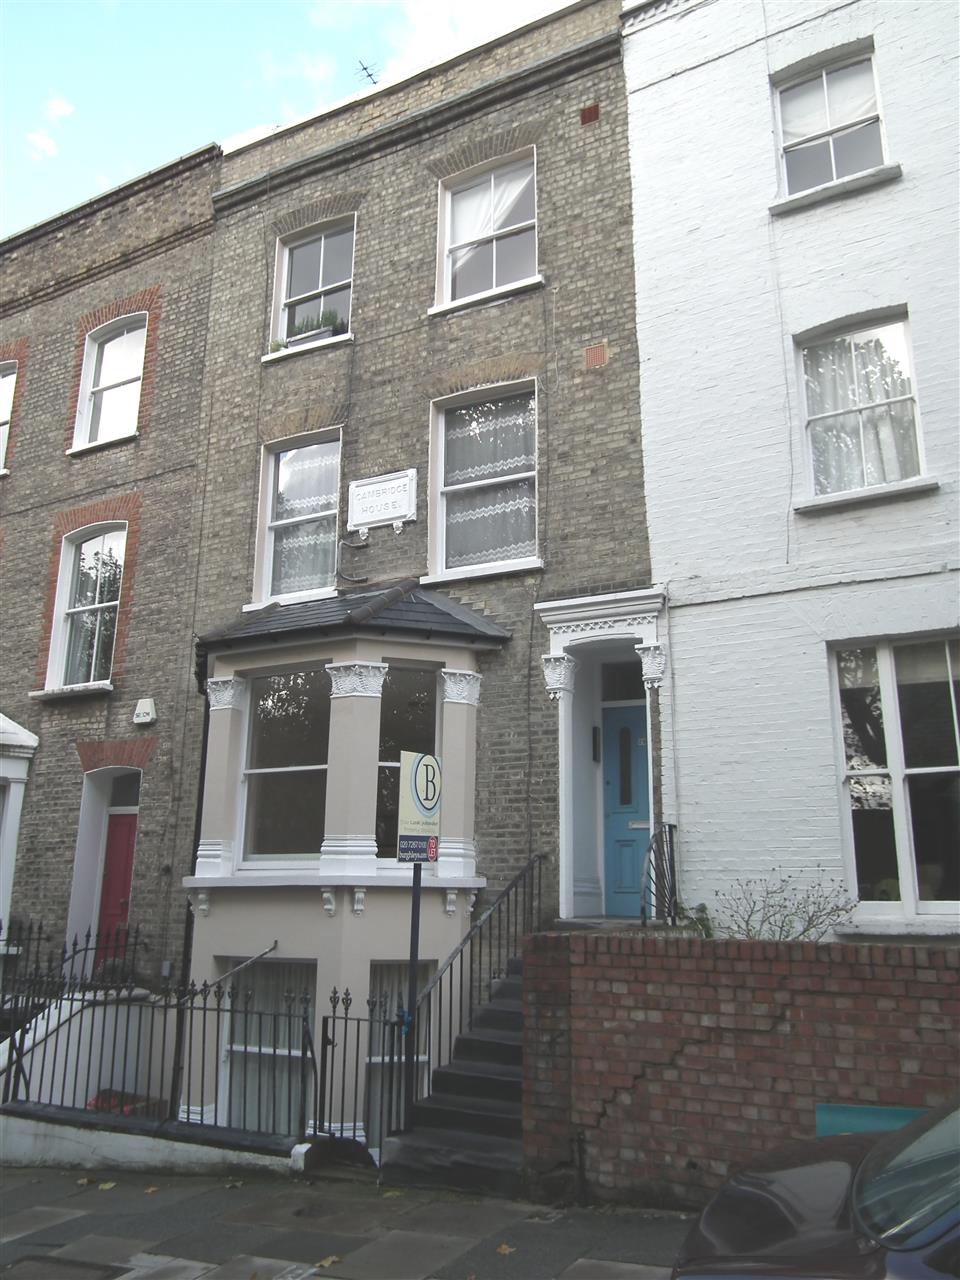 AVAILABLE 22nd JULY 2023 TO A MAXIMUM OF TWO NON-RELATED SHARERS OR A FAMILY! Located in the heart of Dartmouth Park and within walking distance of the shopping, transport and recreation facilities of Highgate, Kentish Town and Tufnell Park is this well presented raised ground floor converted ...